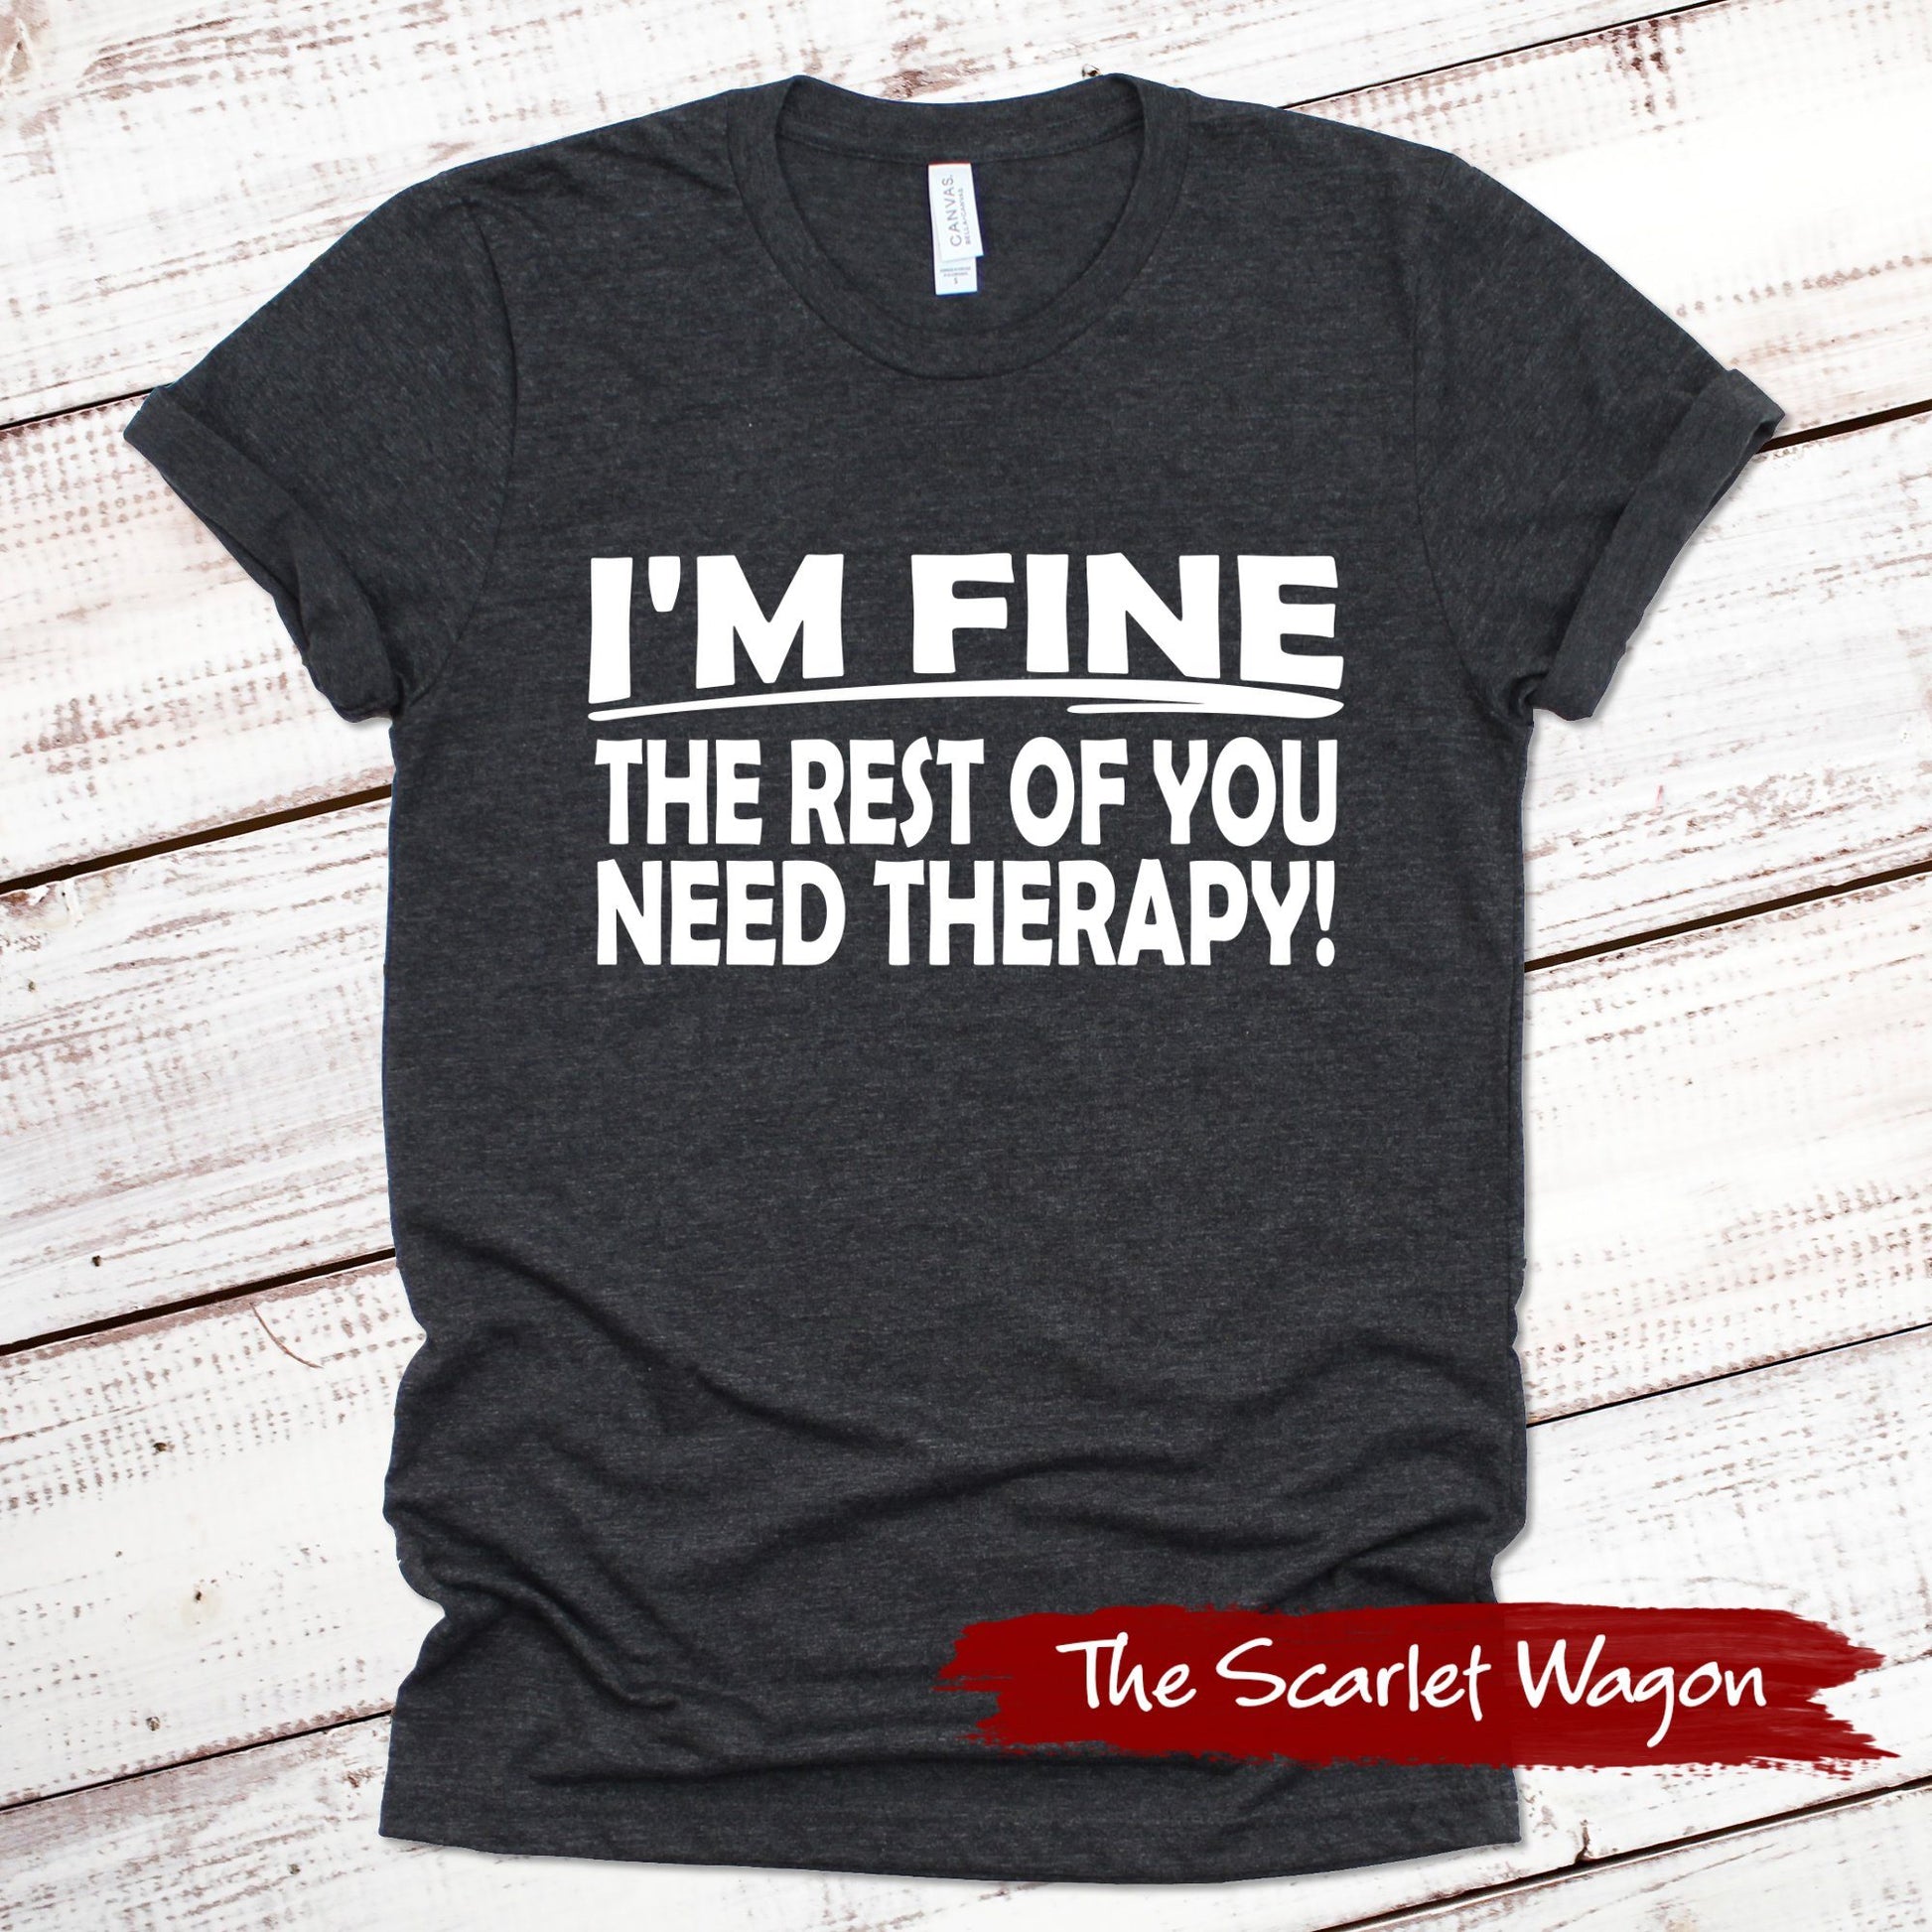 I'm Fine the Rest of You Need Therapy Funny Shirt Scarlet Wagon Dark Gray Heather XS 